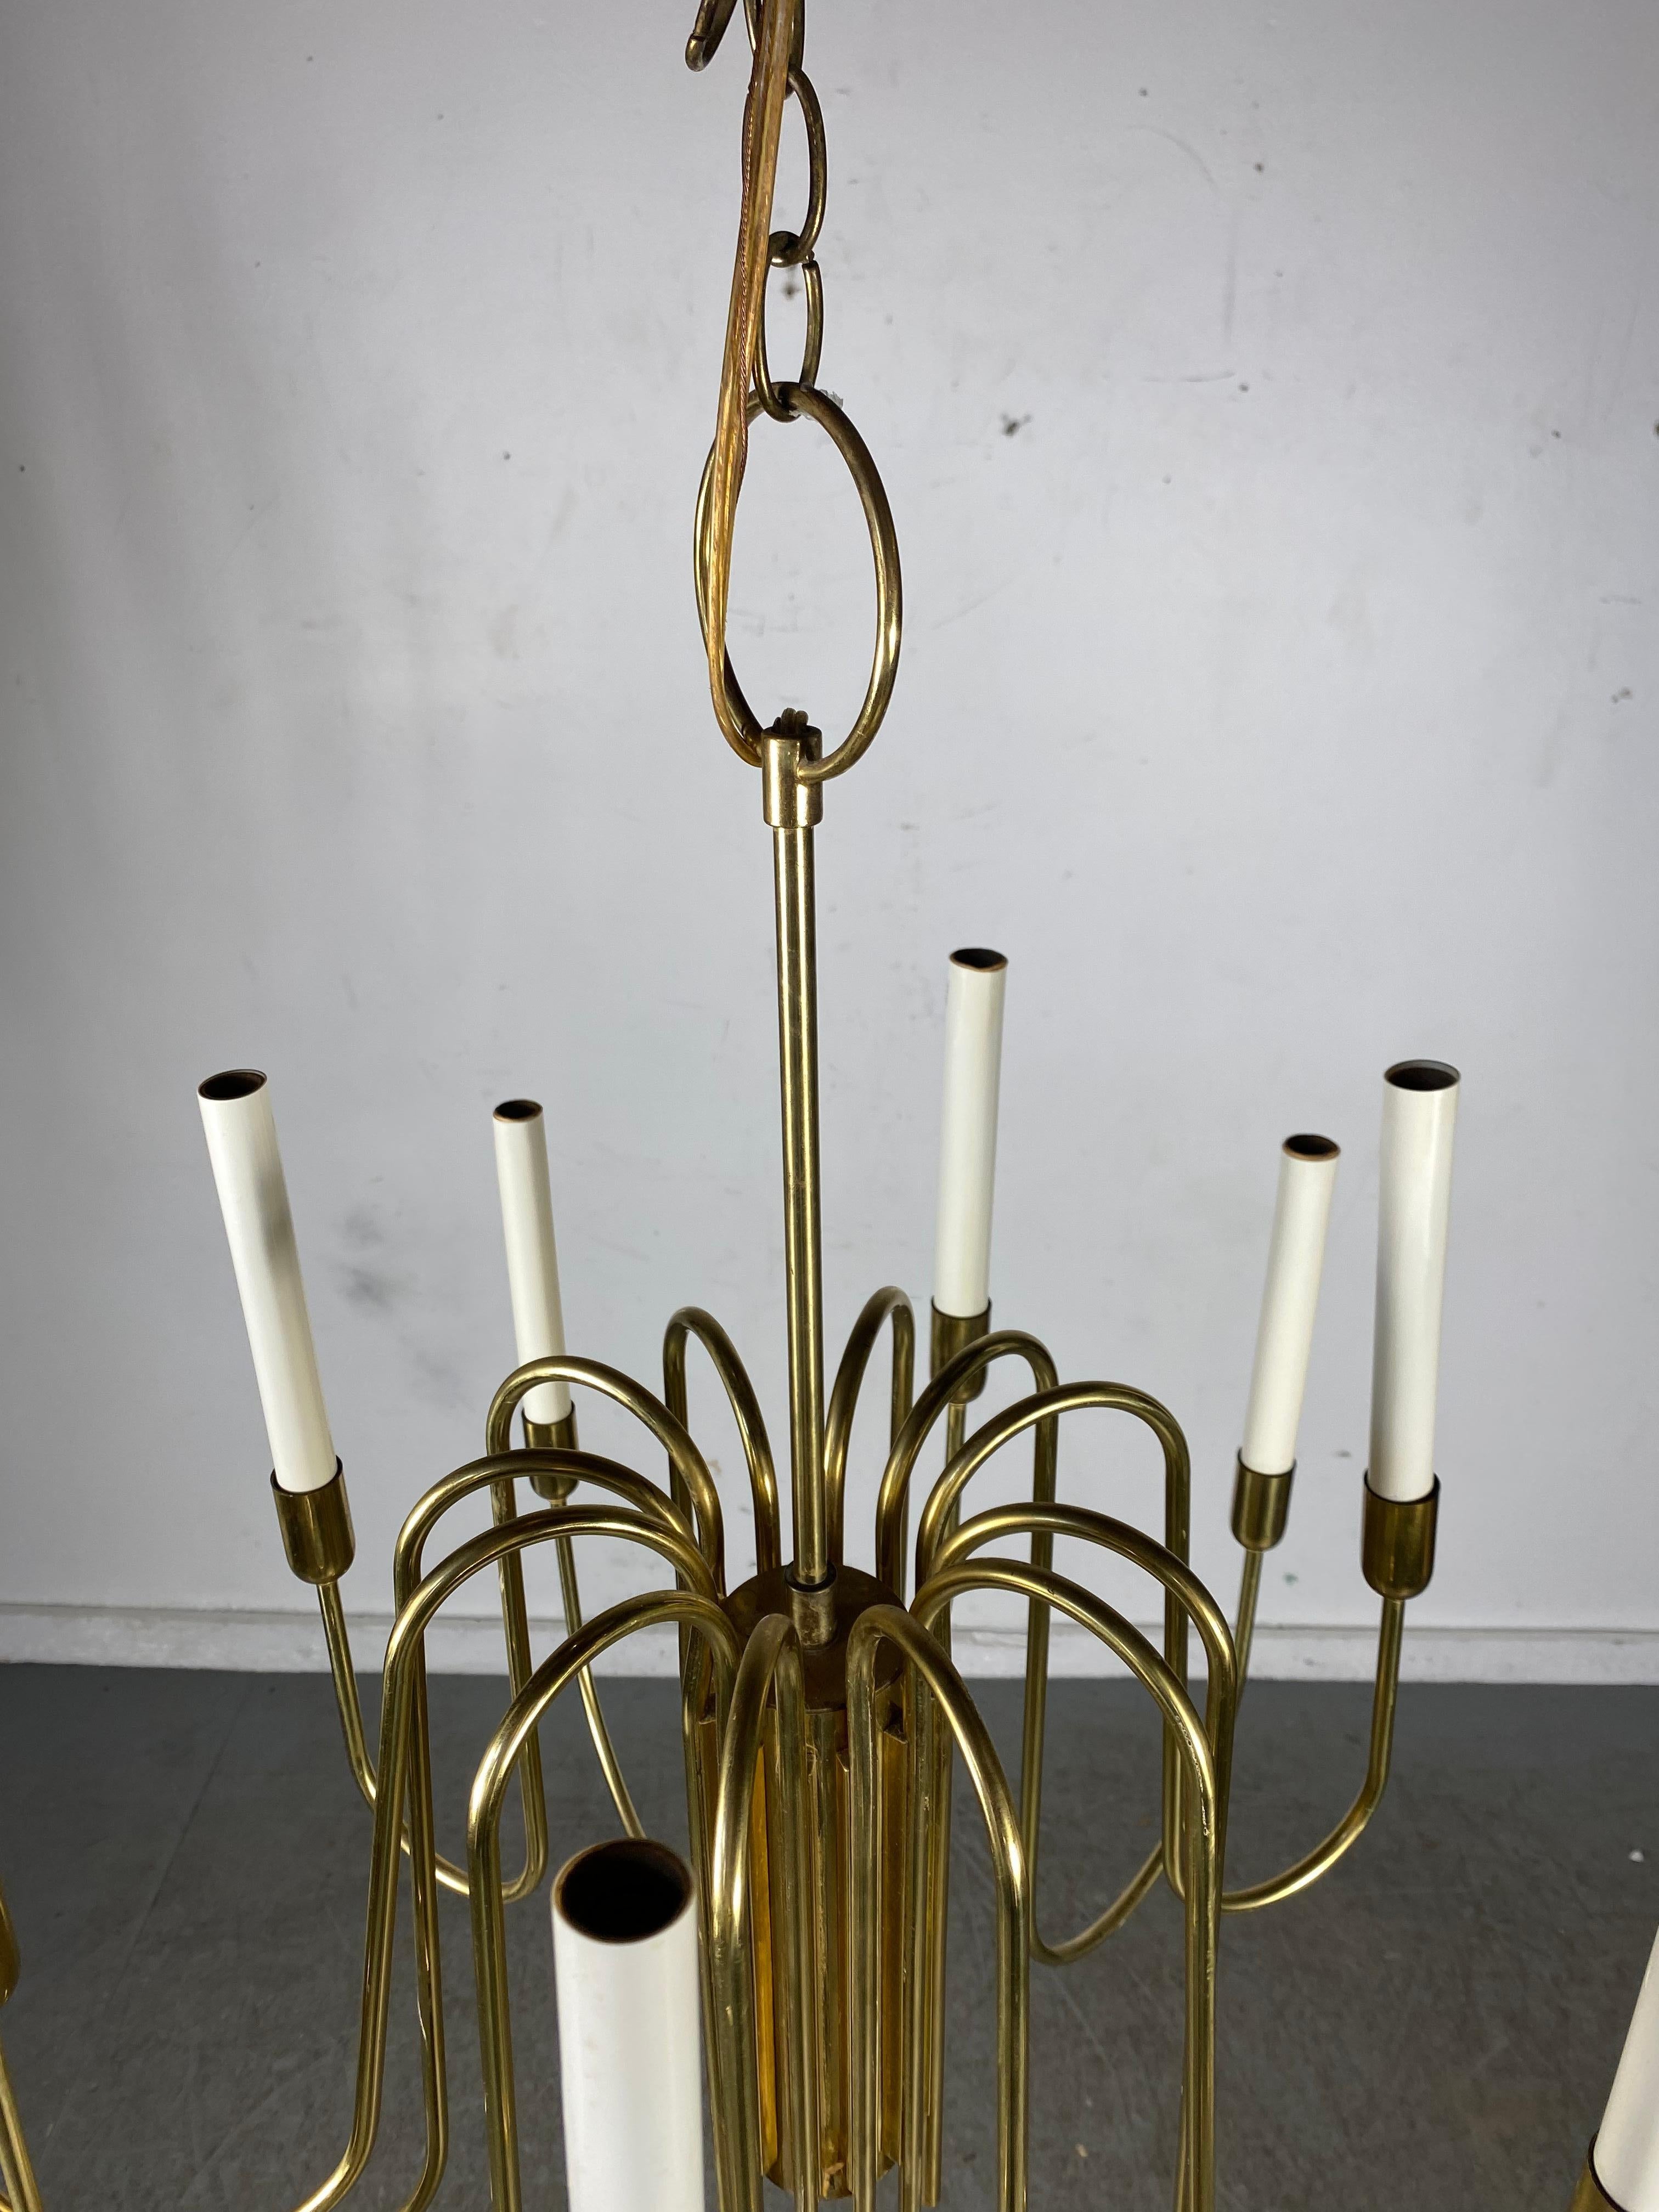 Stunning 1960s Mid-Century Modern brass chandelier in the style of Tommi Parzinger made by Lightolier, Tested and electrical working.